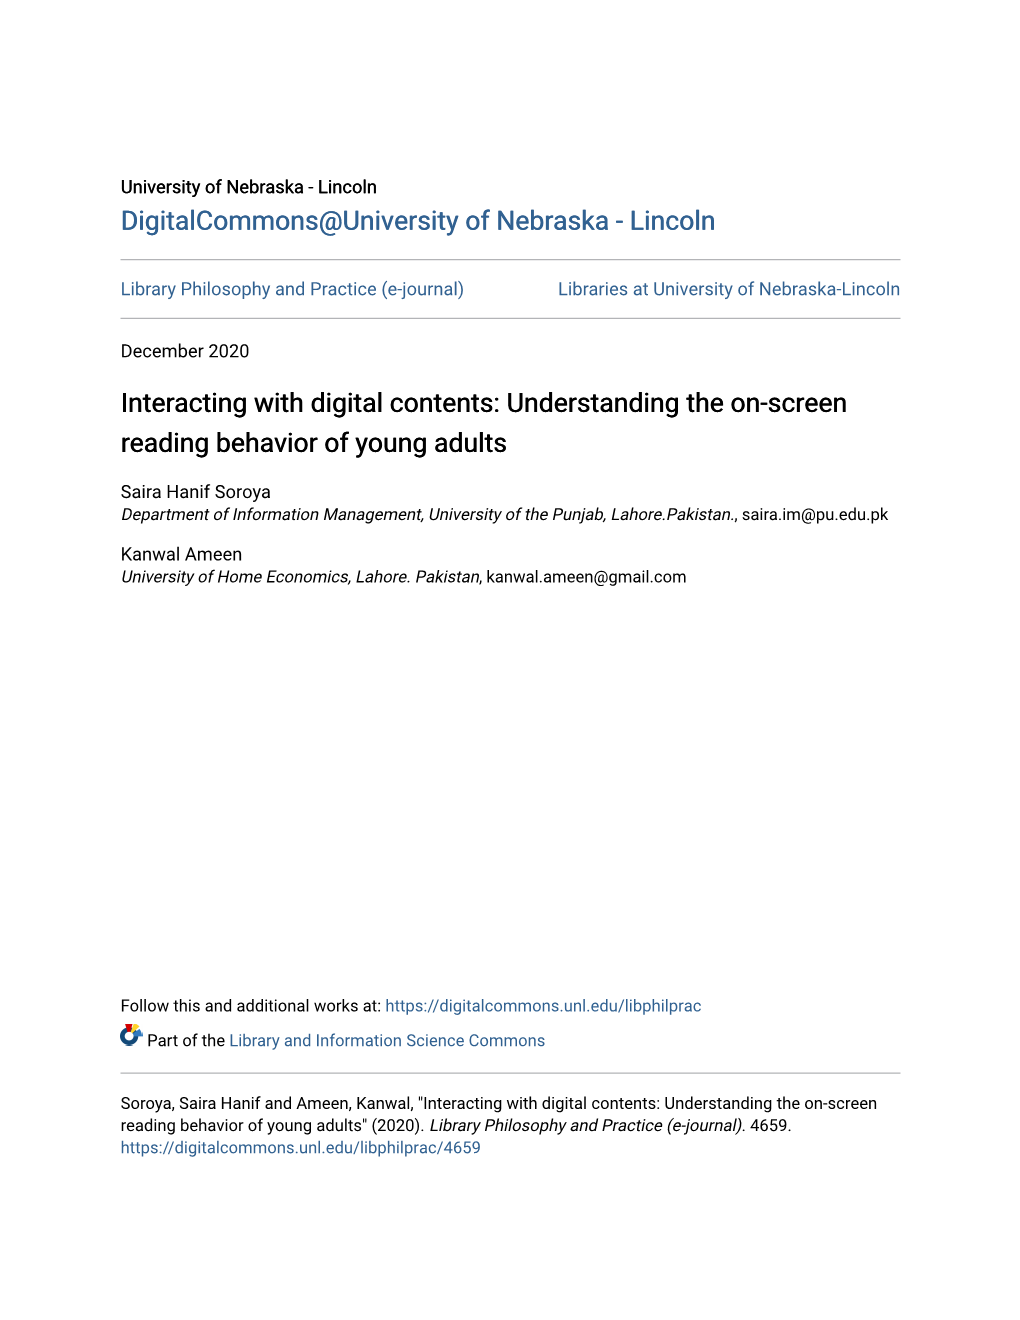 Interacting with Digital Contents: Understanding the On-Screen Reading Behavior of Young Adults